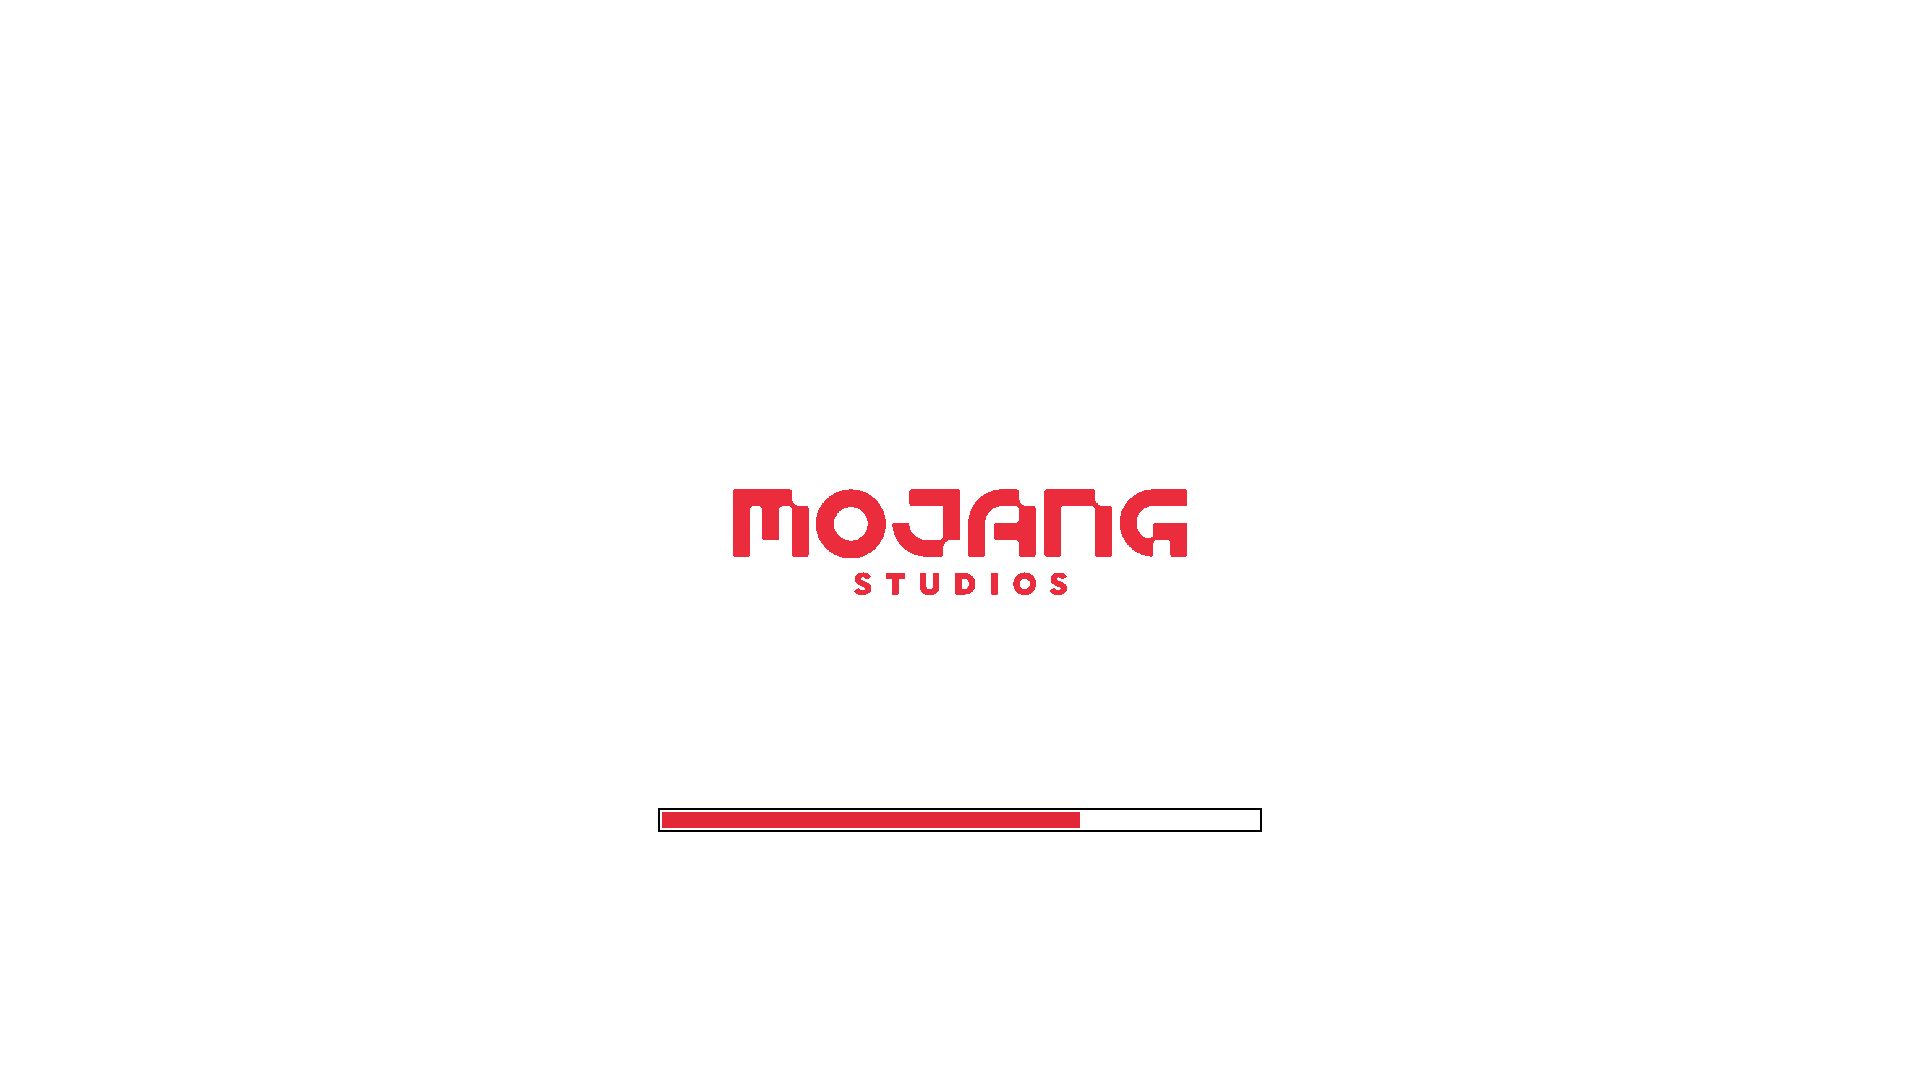 I changed my resource pack to include the new Mojang logo in the loading screen for Minecraft